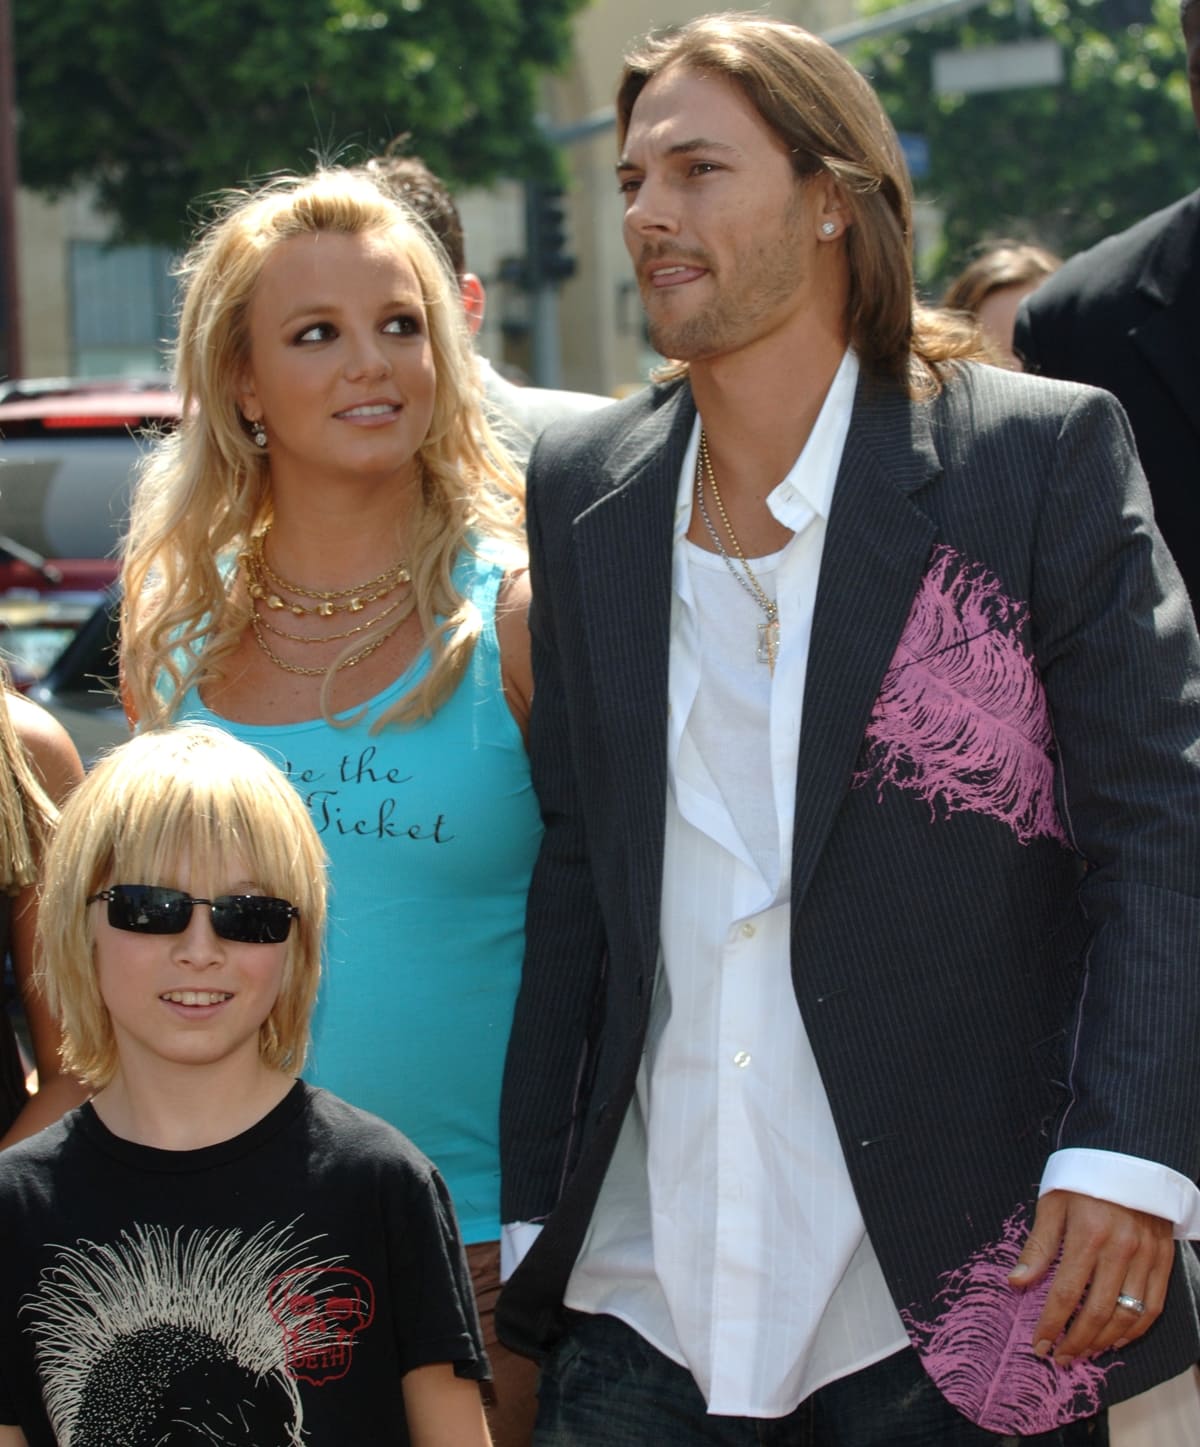 Britney Spears and Keven Federline divorced in 2007 after nearly three years of marriage